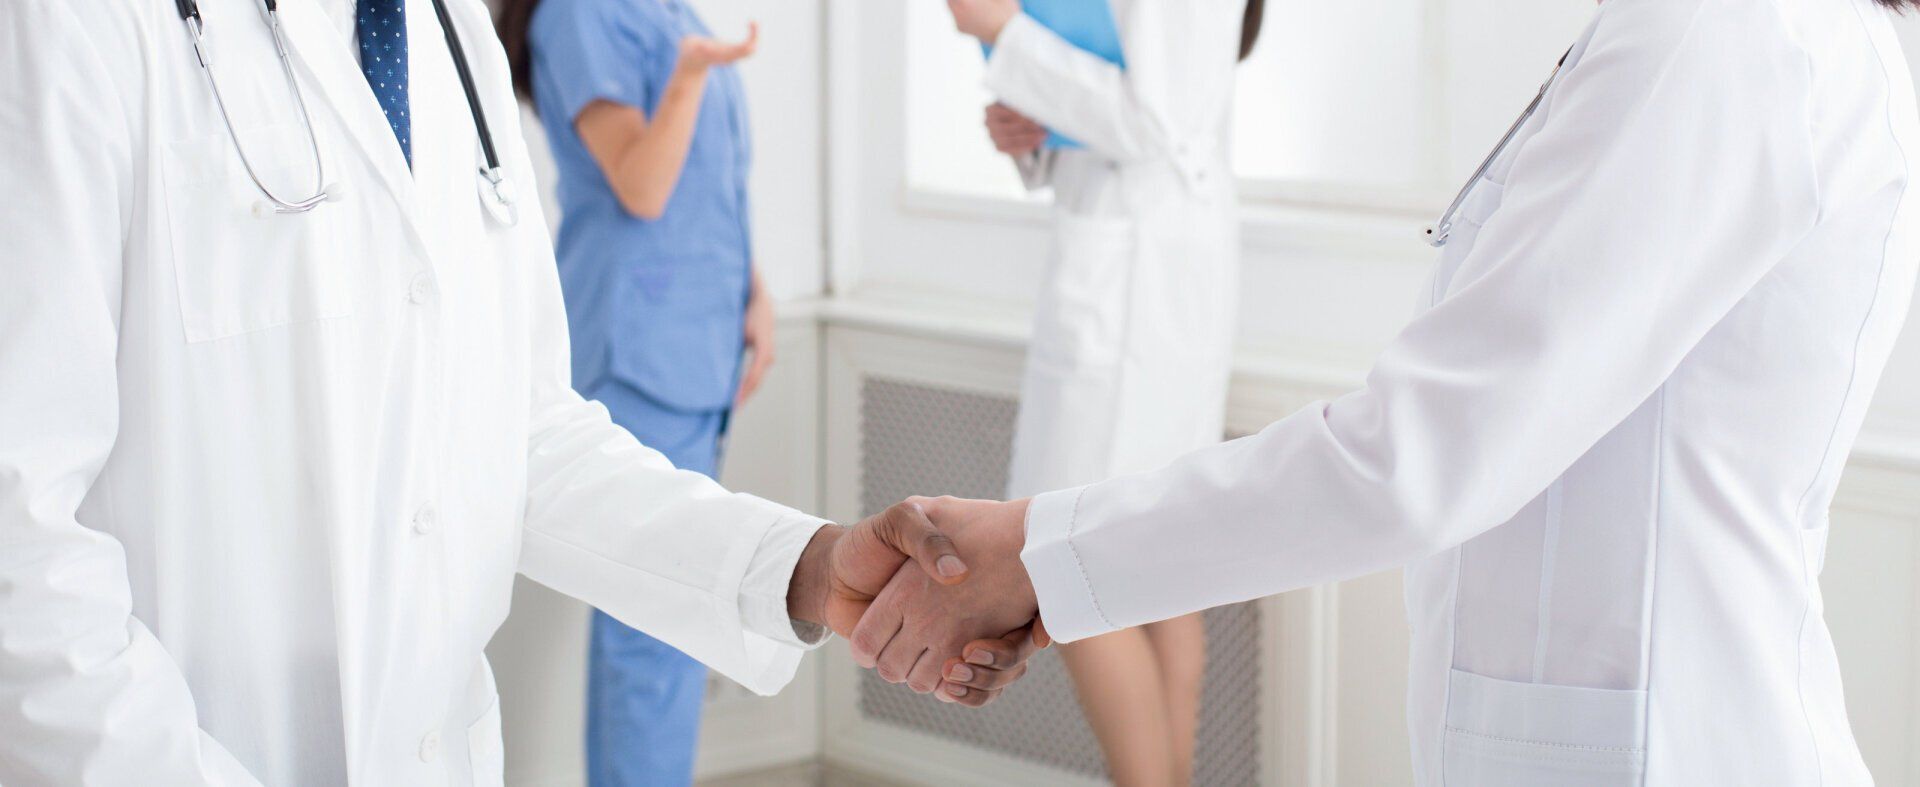 Two doctors shaking hands after a successful collaboration